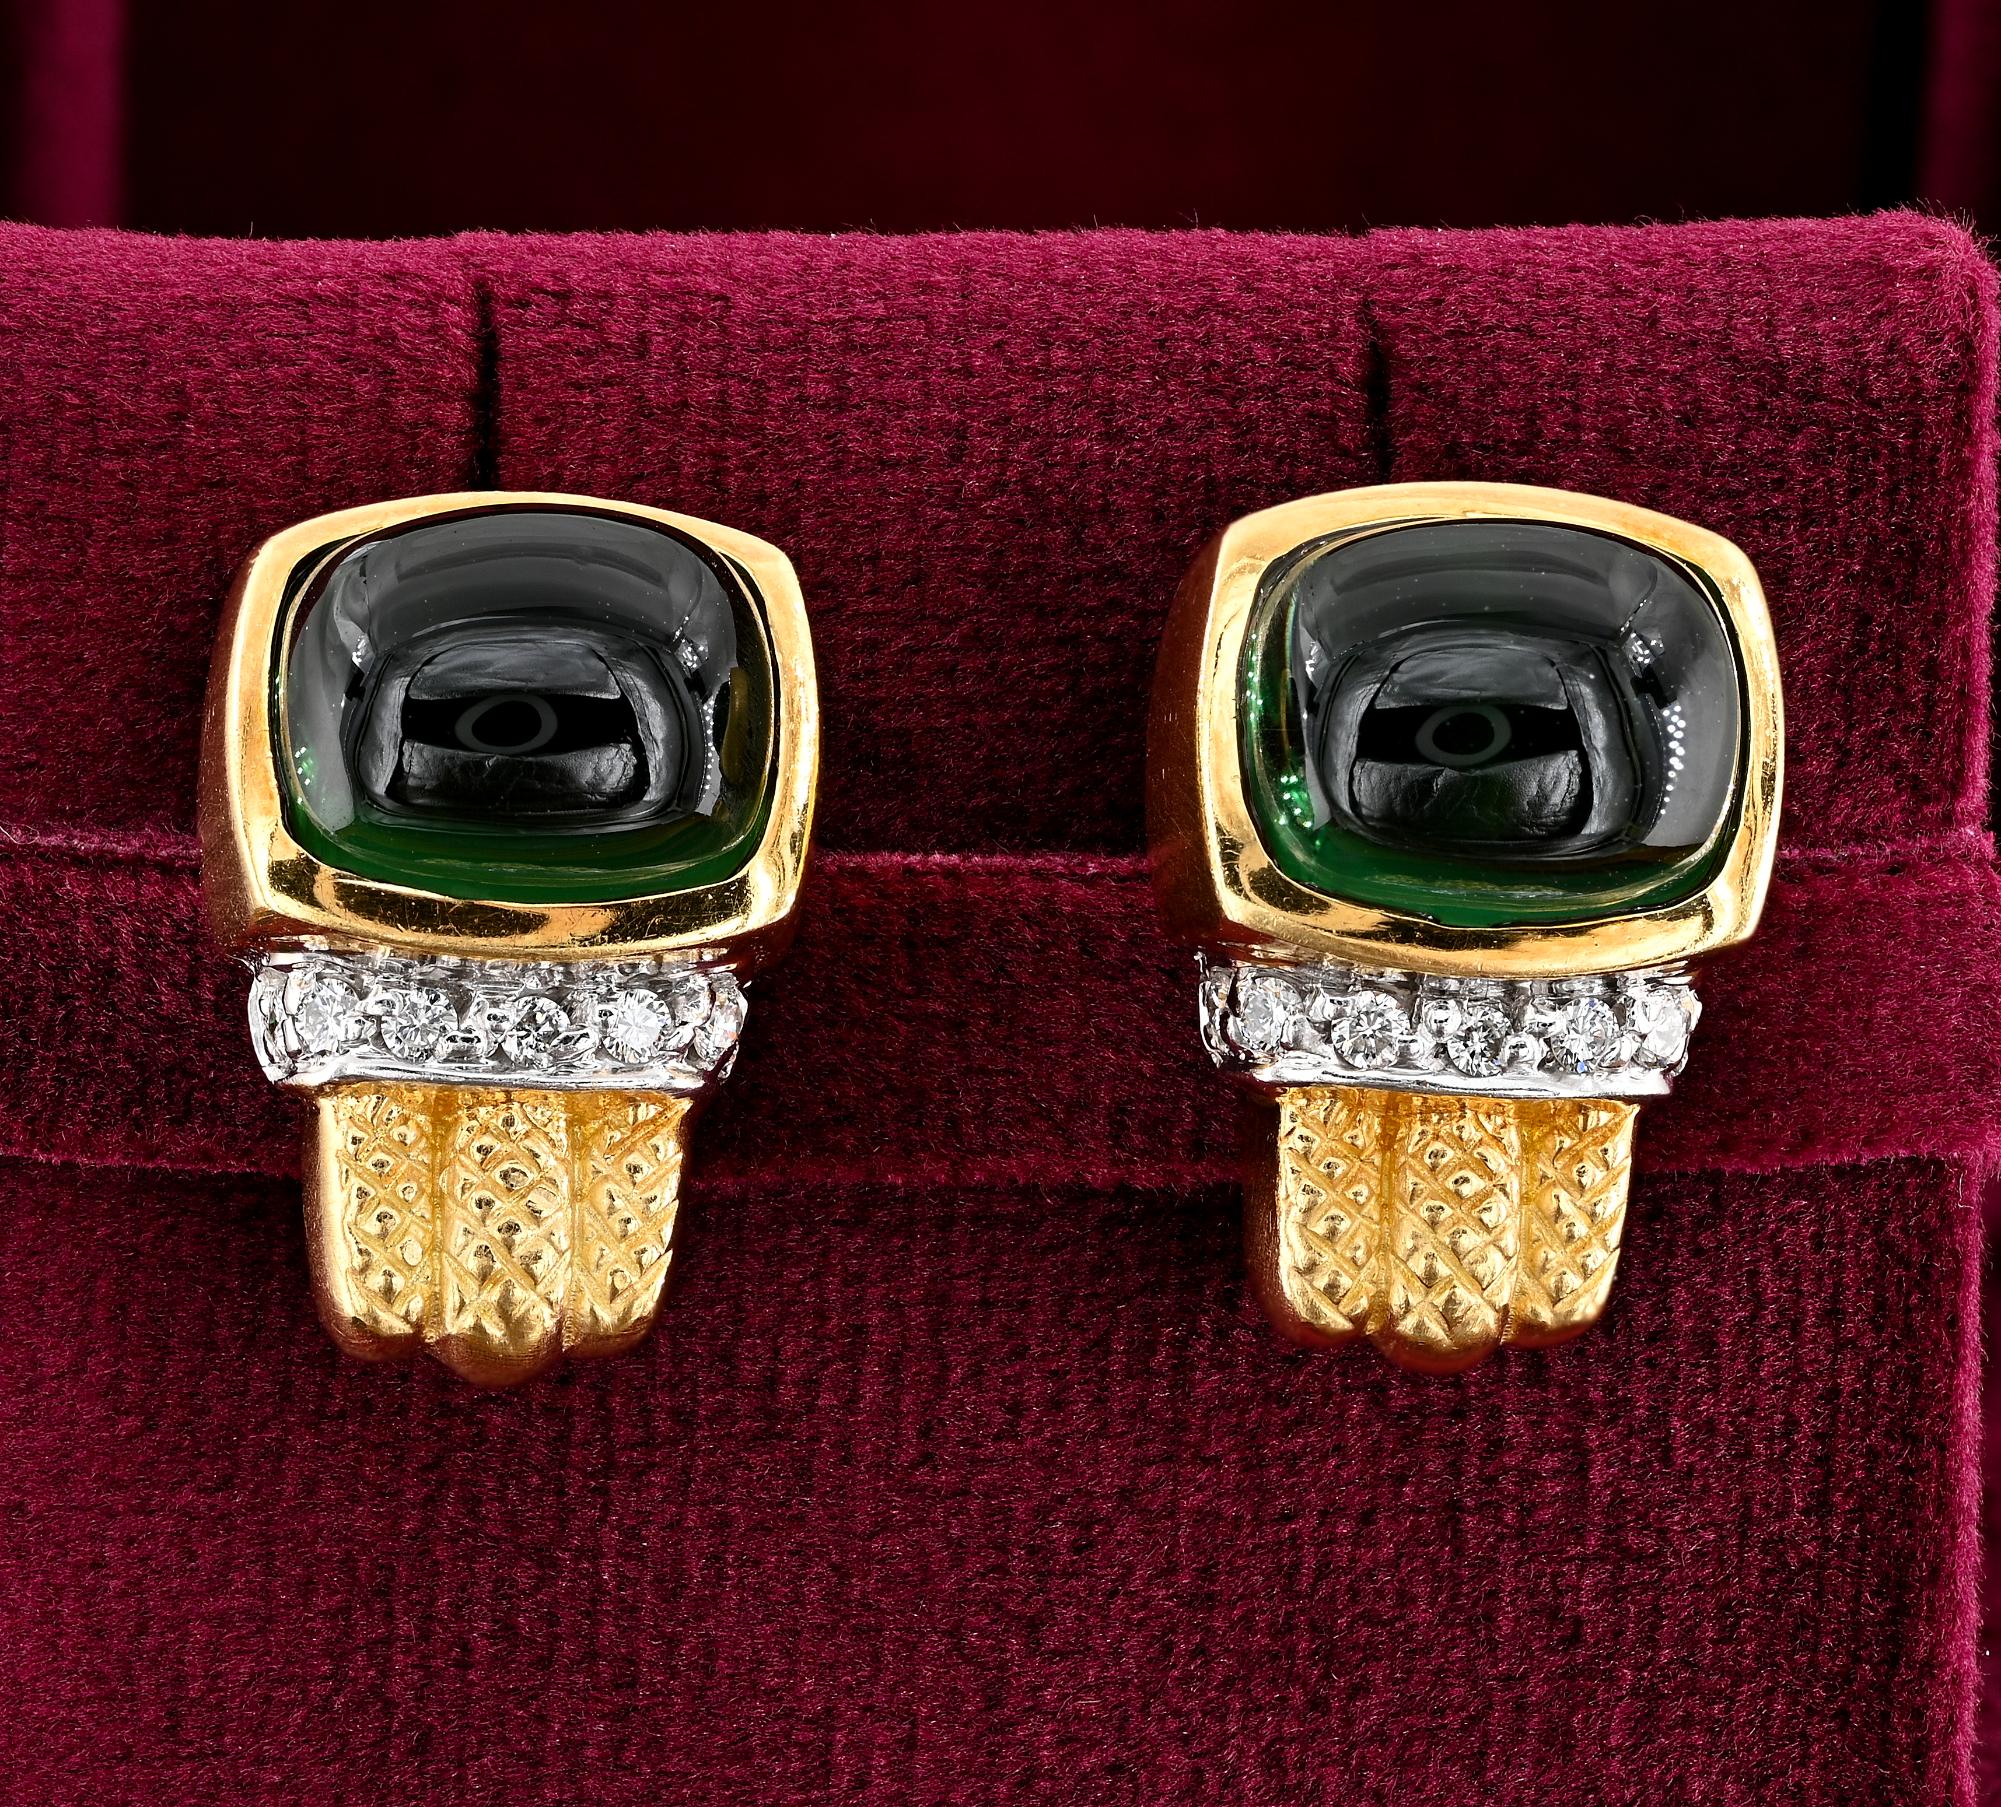 Tres Chic
Superb vintage earrings out from 60’/70’s
Distinctive chic design and dynamic timeless style
substantially hand crafted of solid 14 Kt yellow gold, marked
Centrally set with two stunning Natural untreated Green Tourmaline of pleasing